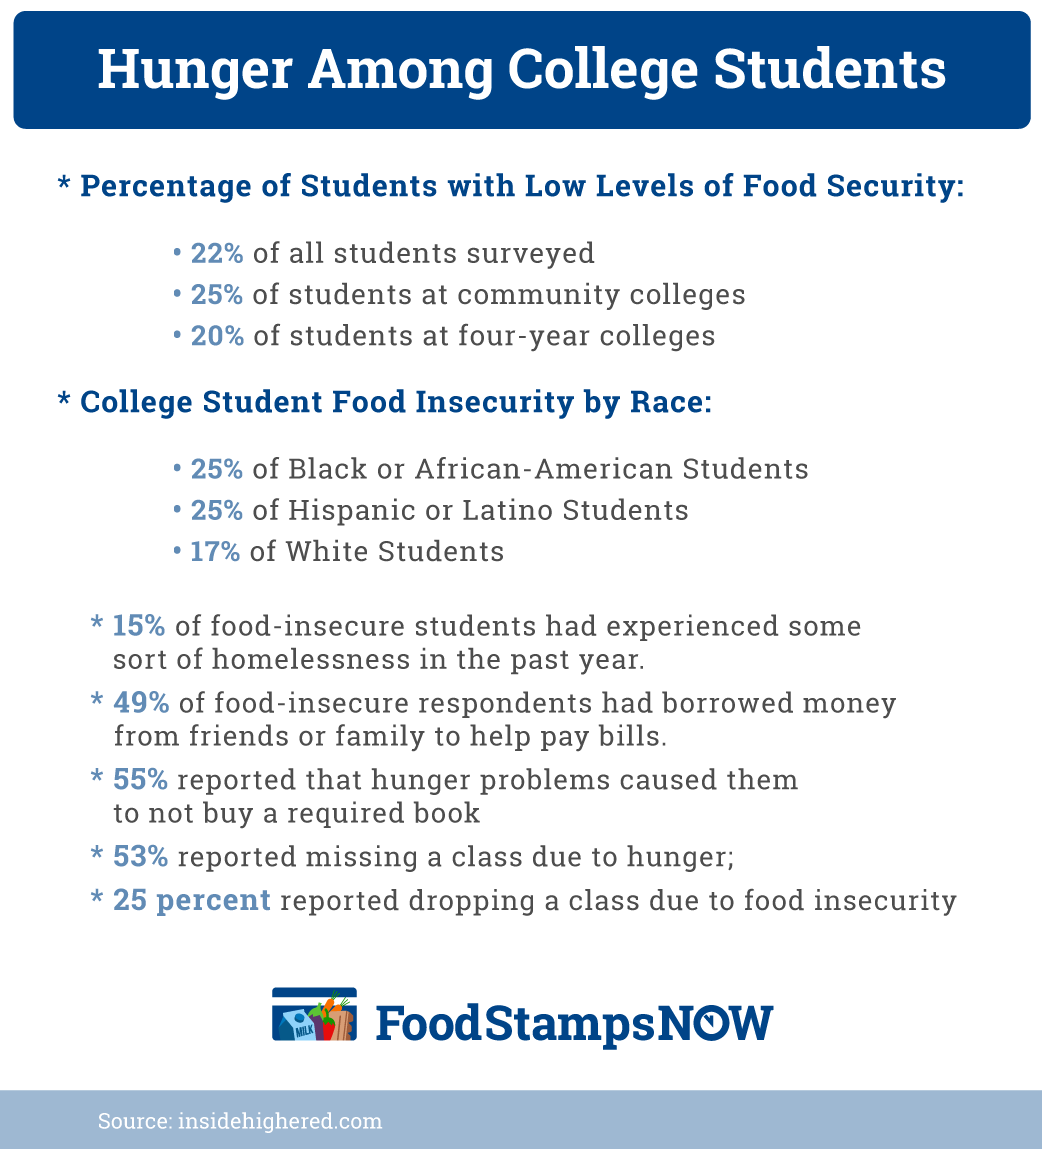 "Hunger Among College Students"